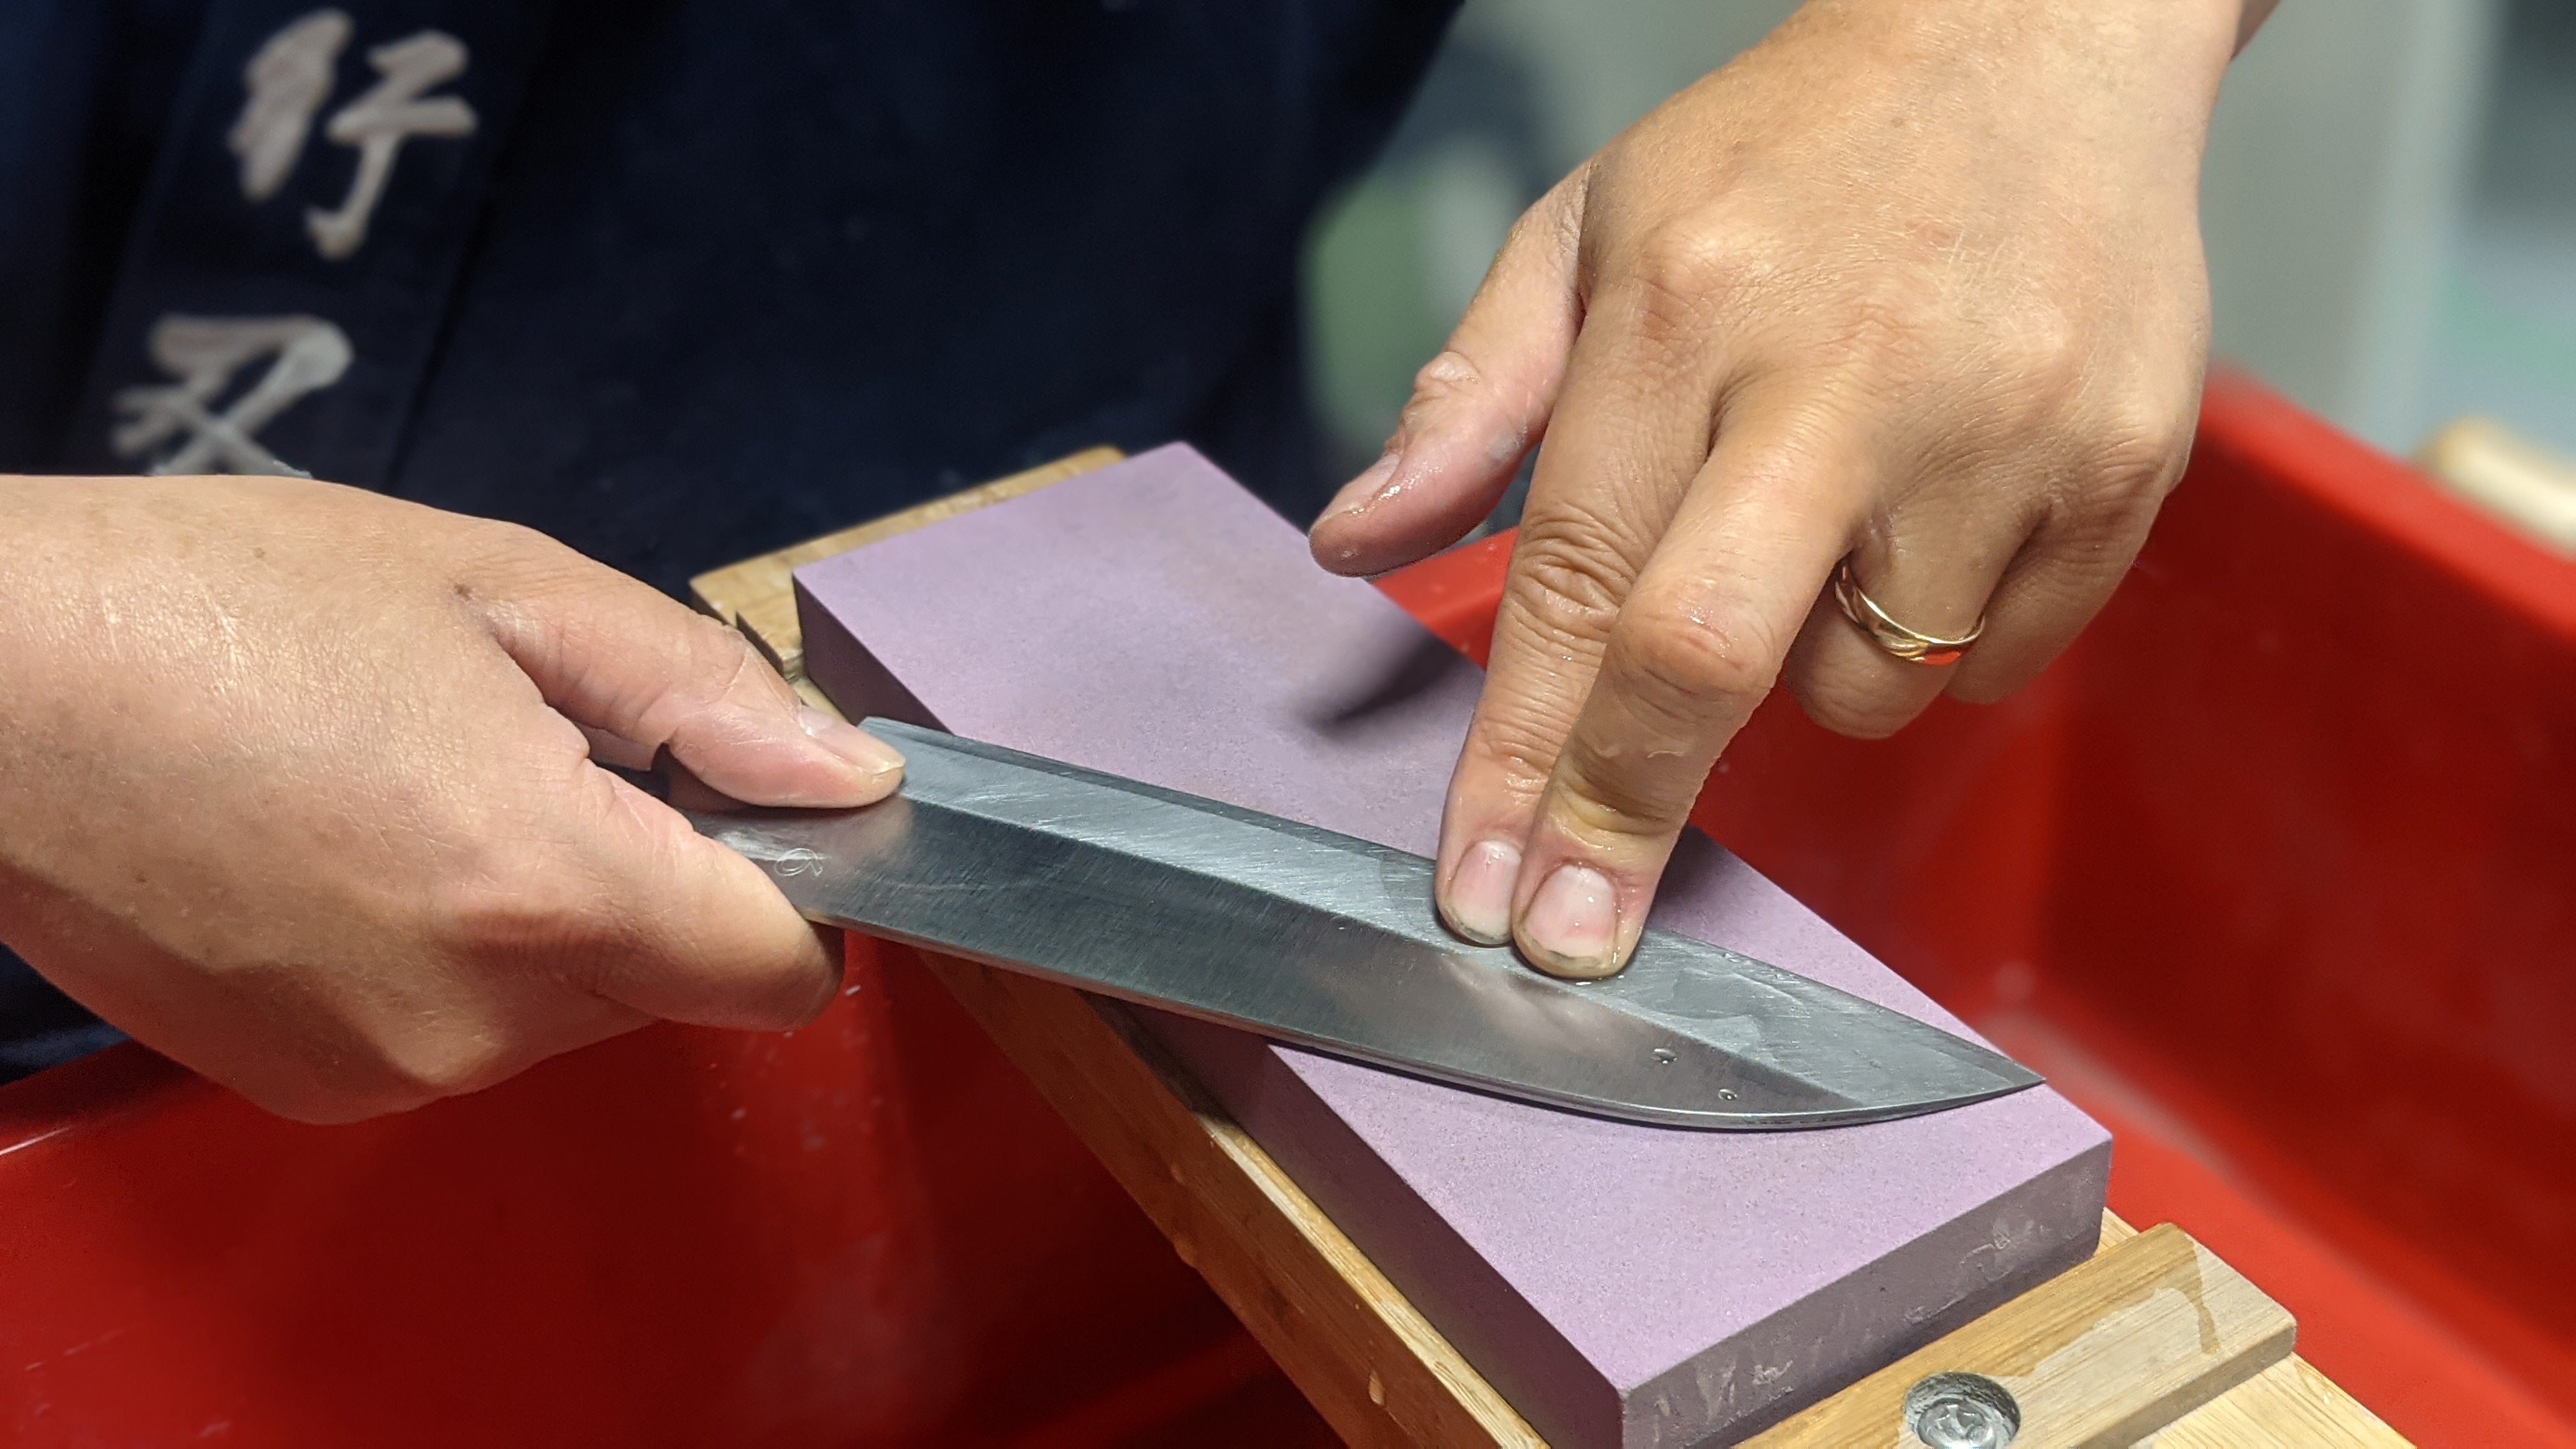 How to Sharpen Kitchen Knives with Japanese Whetstones